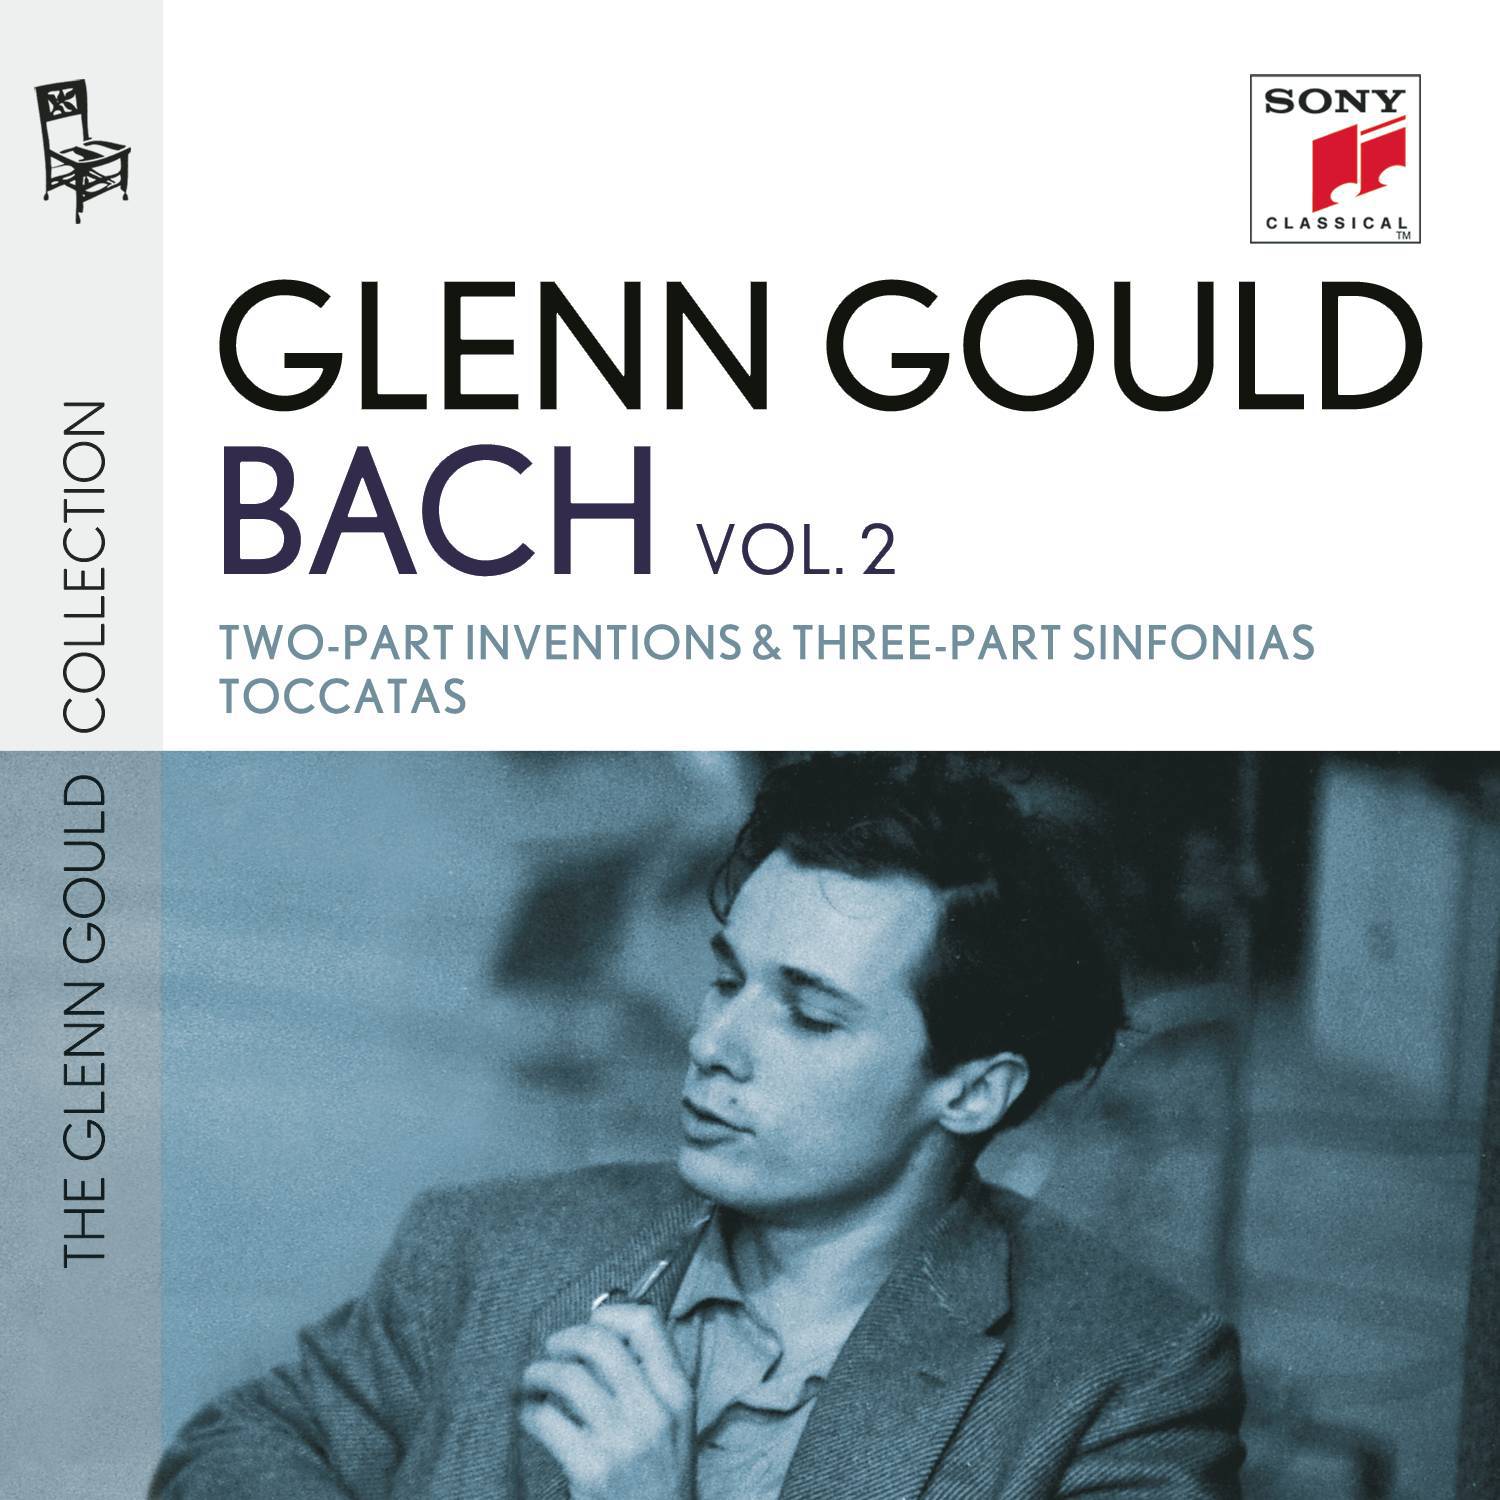 Glenn Gould plays Bach: Two-Part Inventions & Three-Part Sinfonias BWV 772-801; Toccatas BWV 910-916专辑